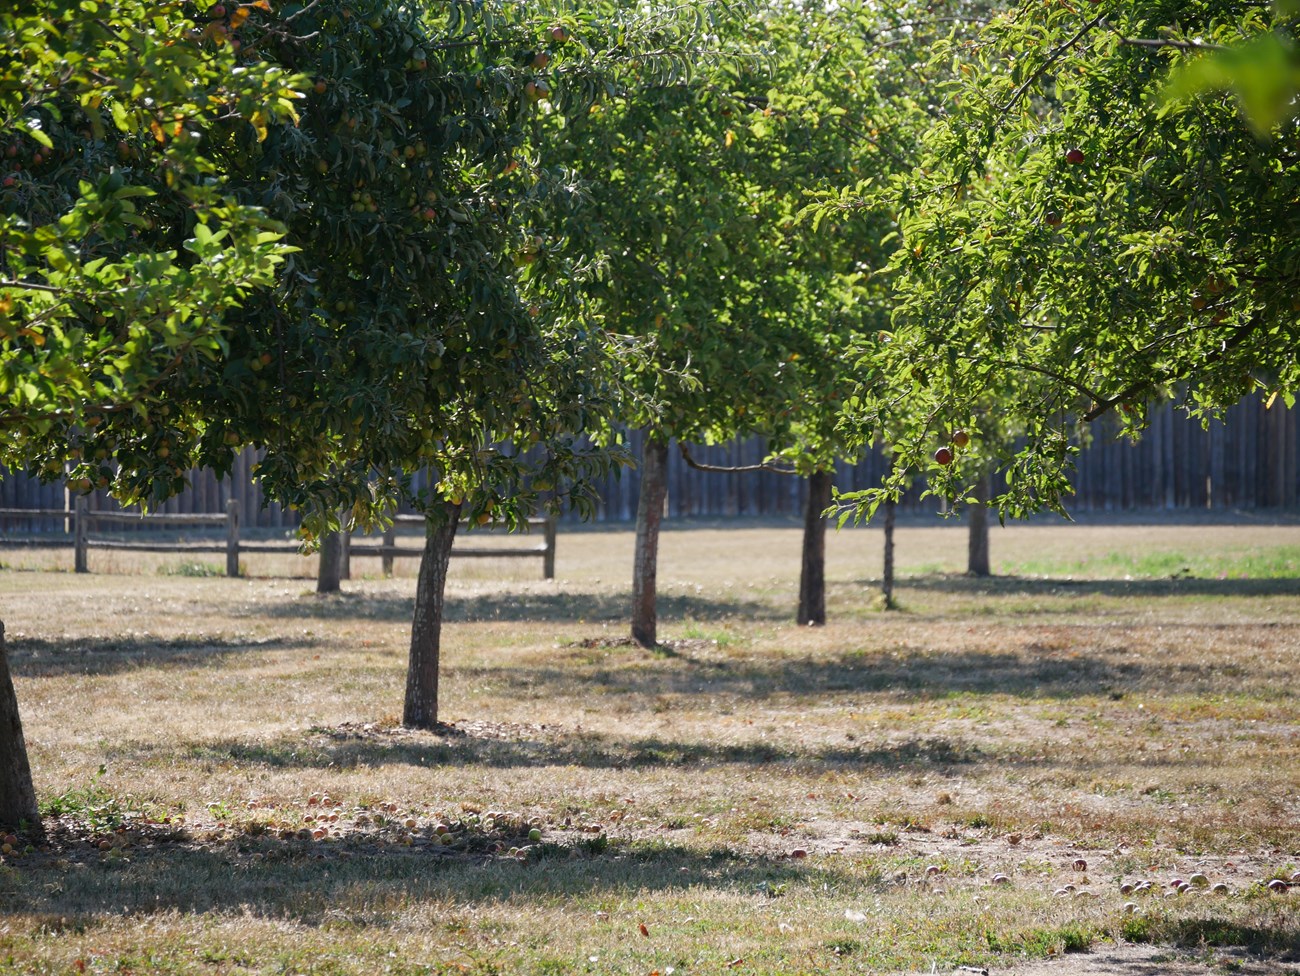 A row of leafy apple trees in an orchard, surrounded by dry grass